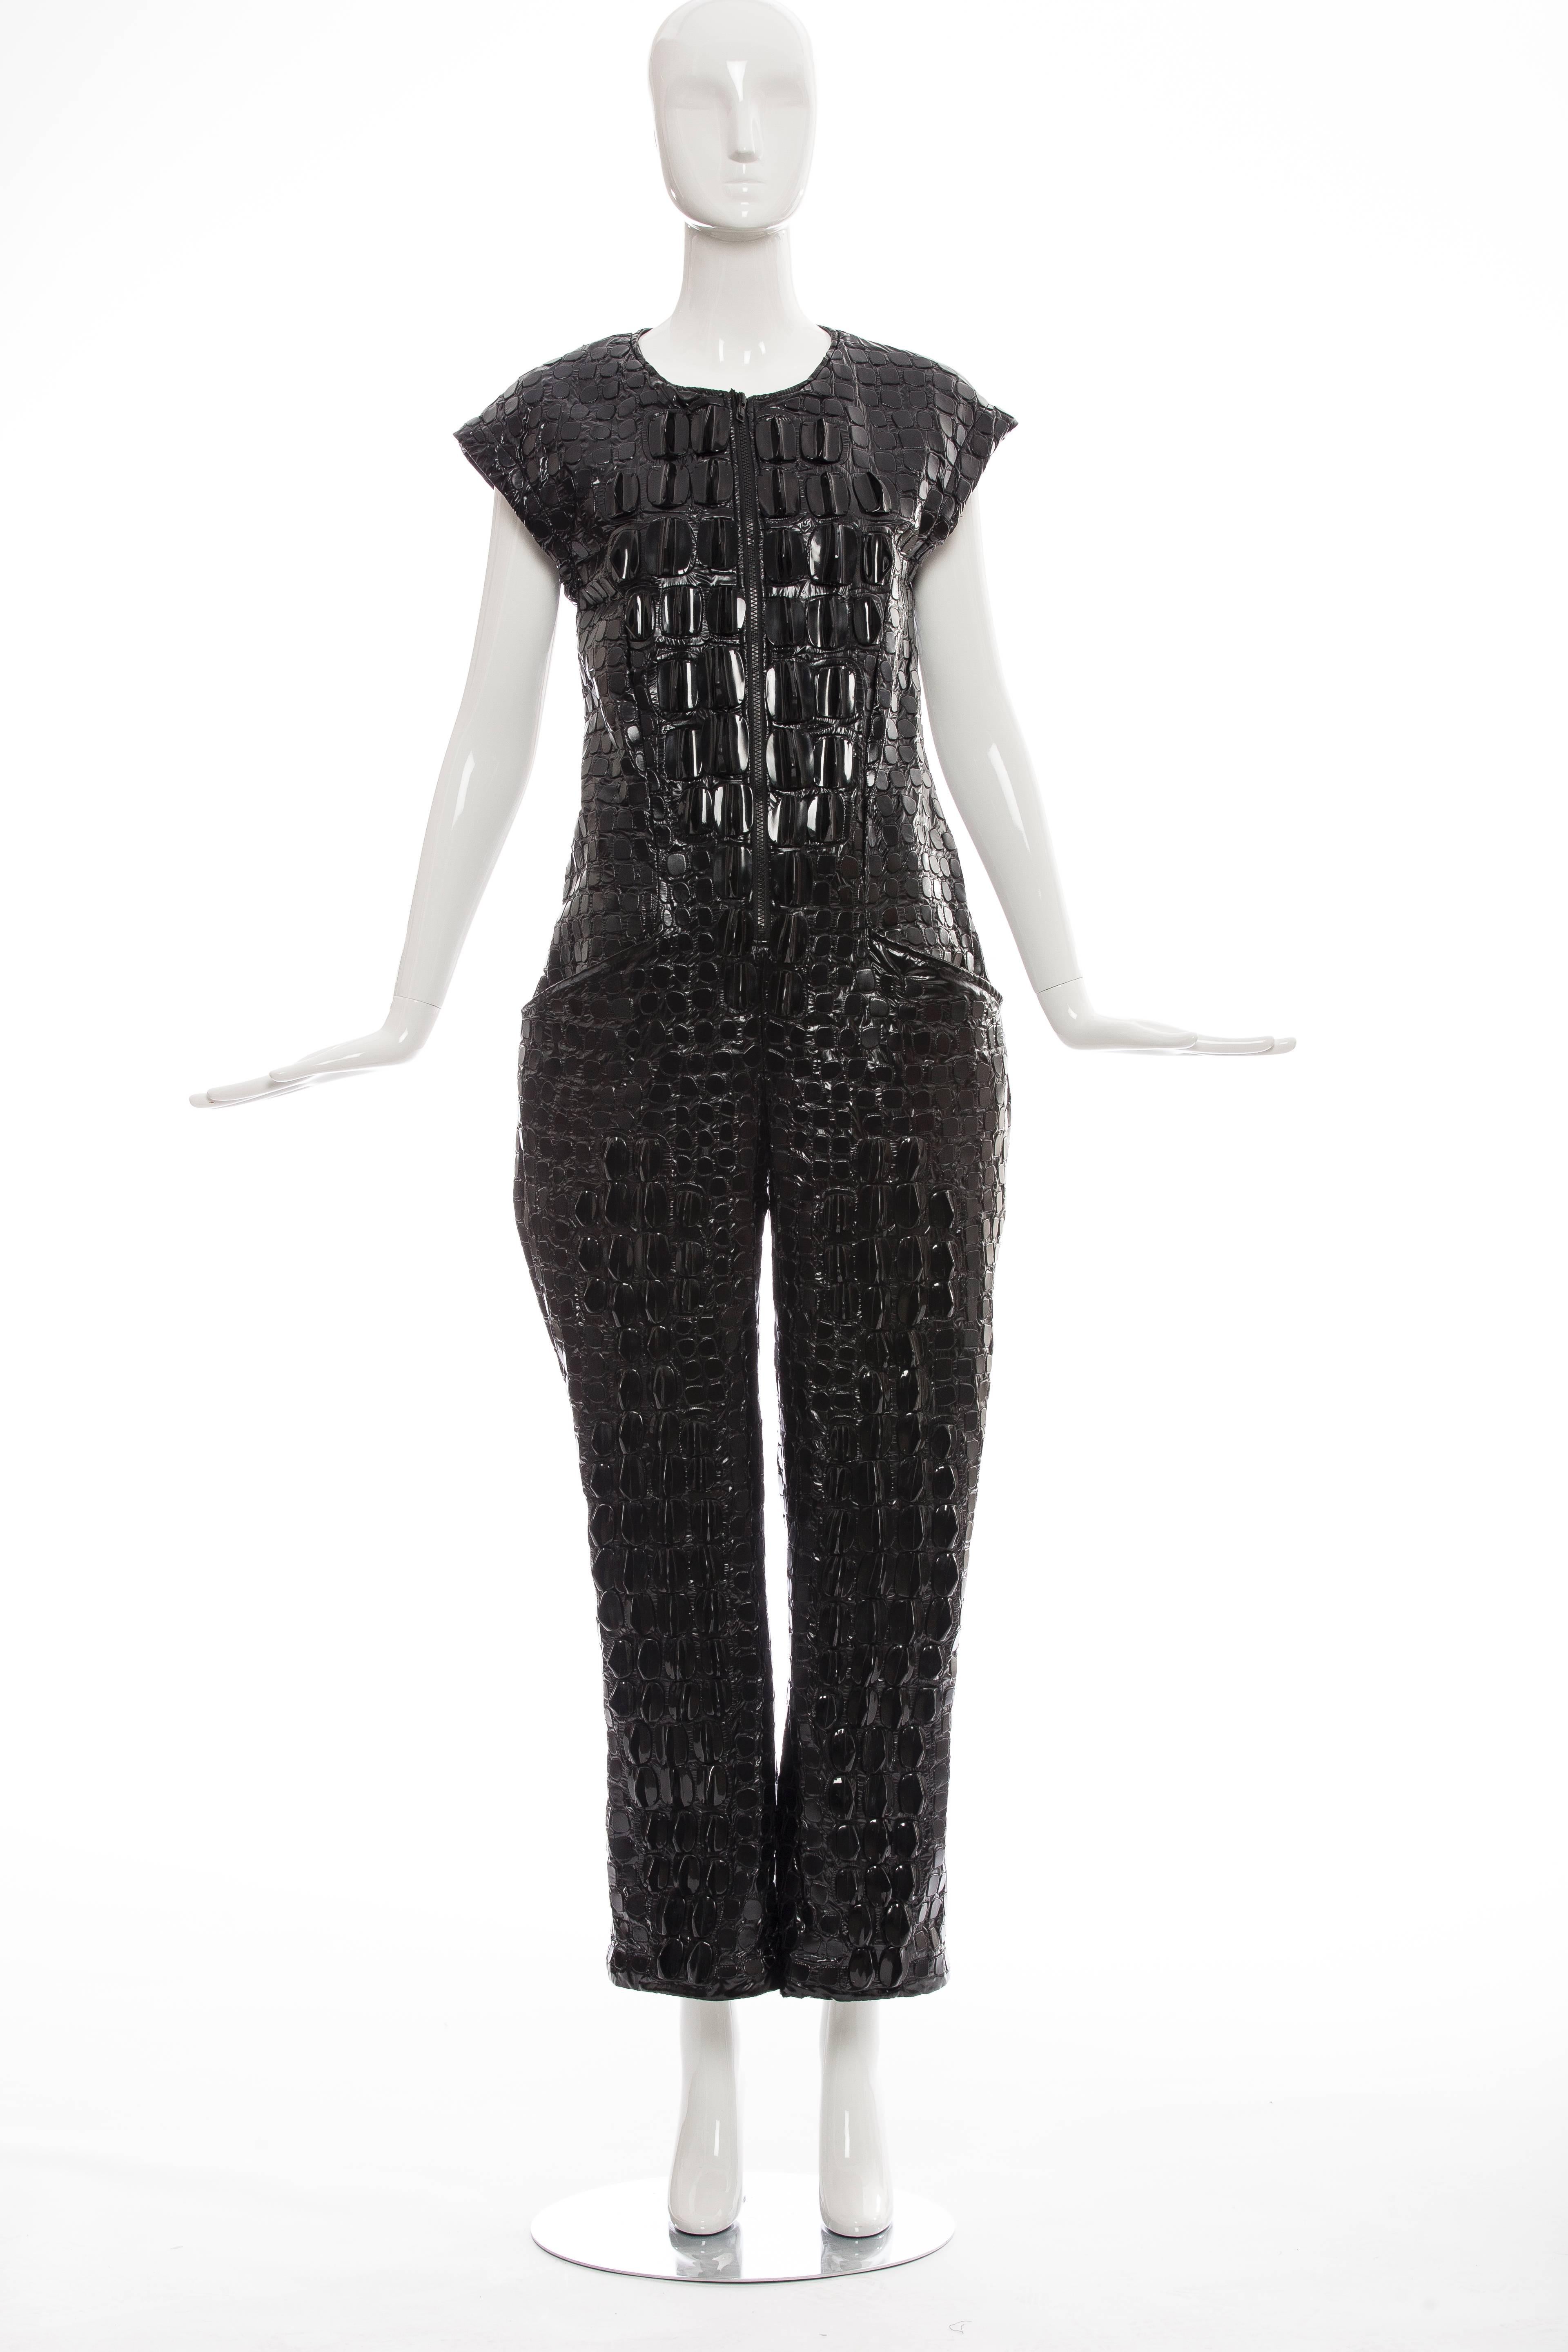 KTZ, Spring 2015 sleeveless nylon jumpsuit with embroidered 3D crocodile skin throughout featuring black hardware scale embellishments, dual seam pockets at sides and exposed zip closure at center front.

Bust 36”, Waist 34”, Hip 34”, Rise 8”,